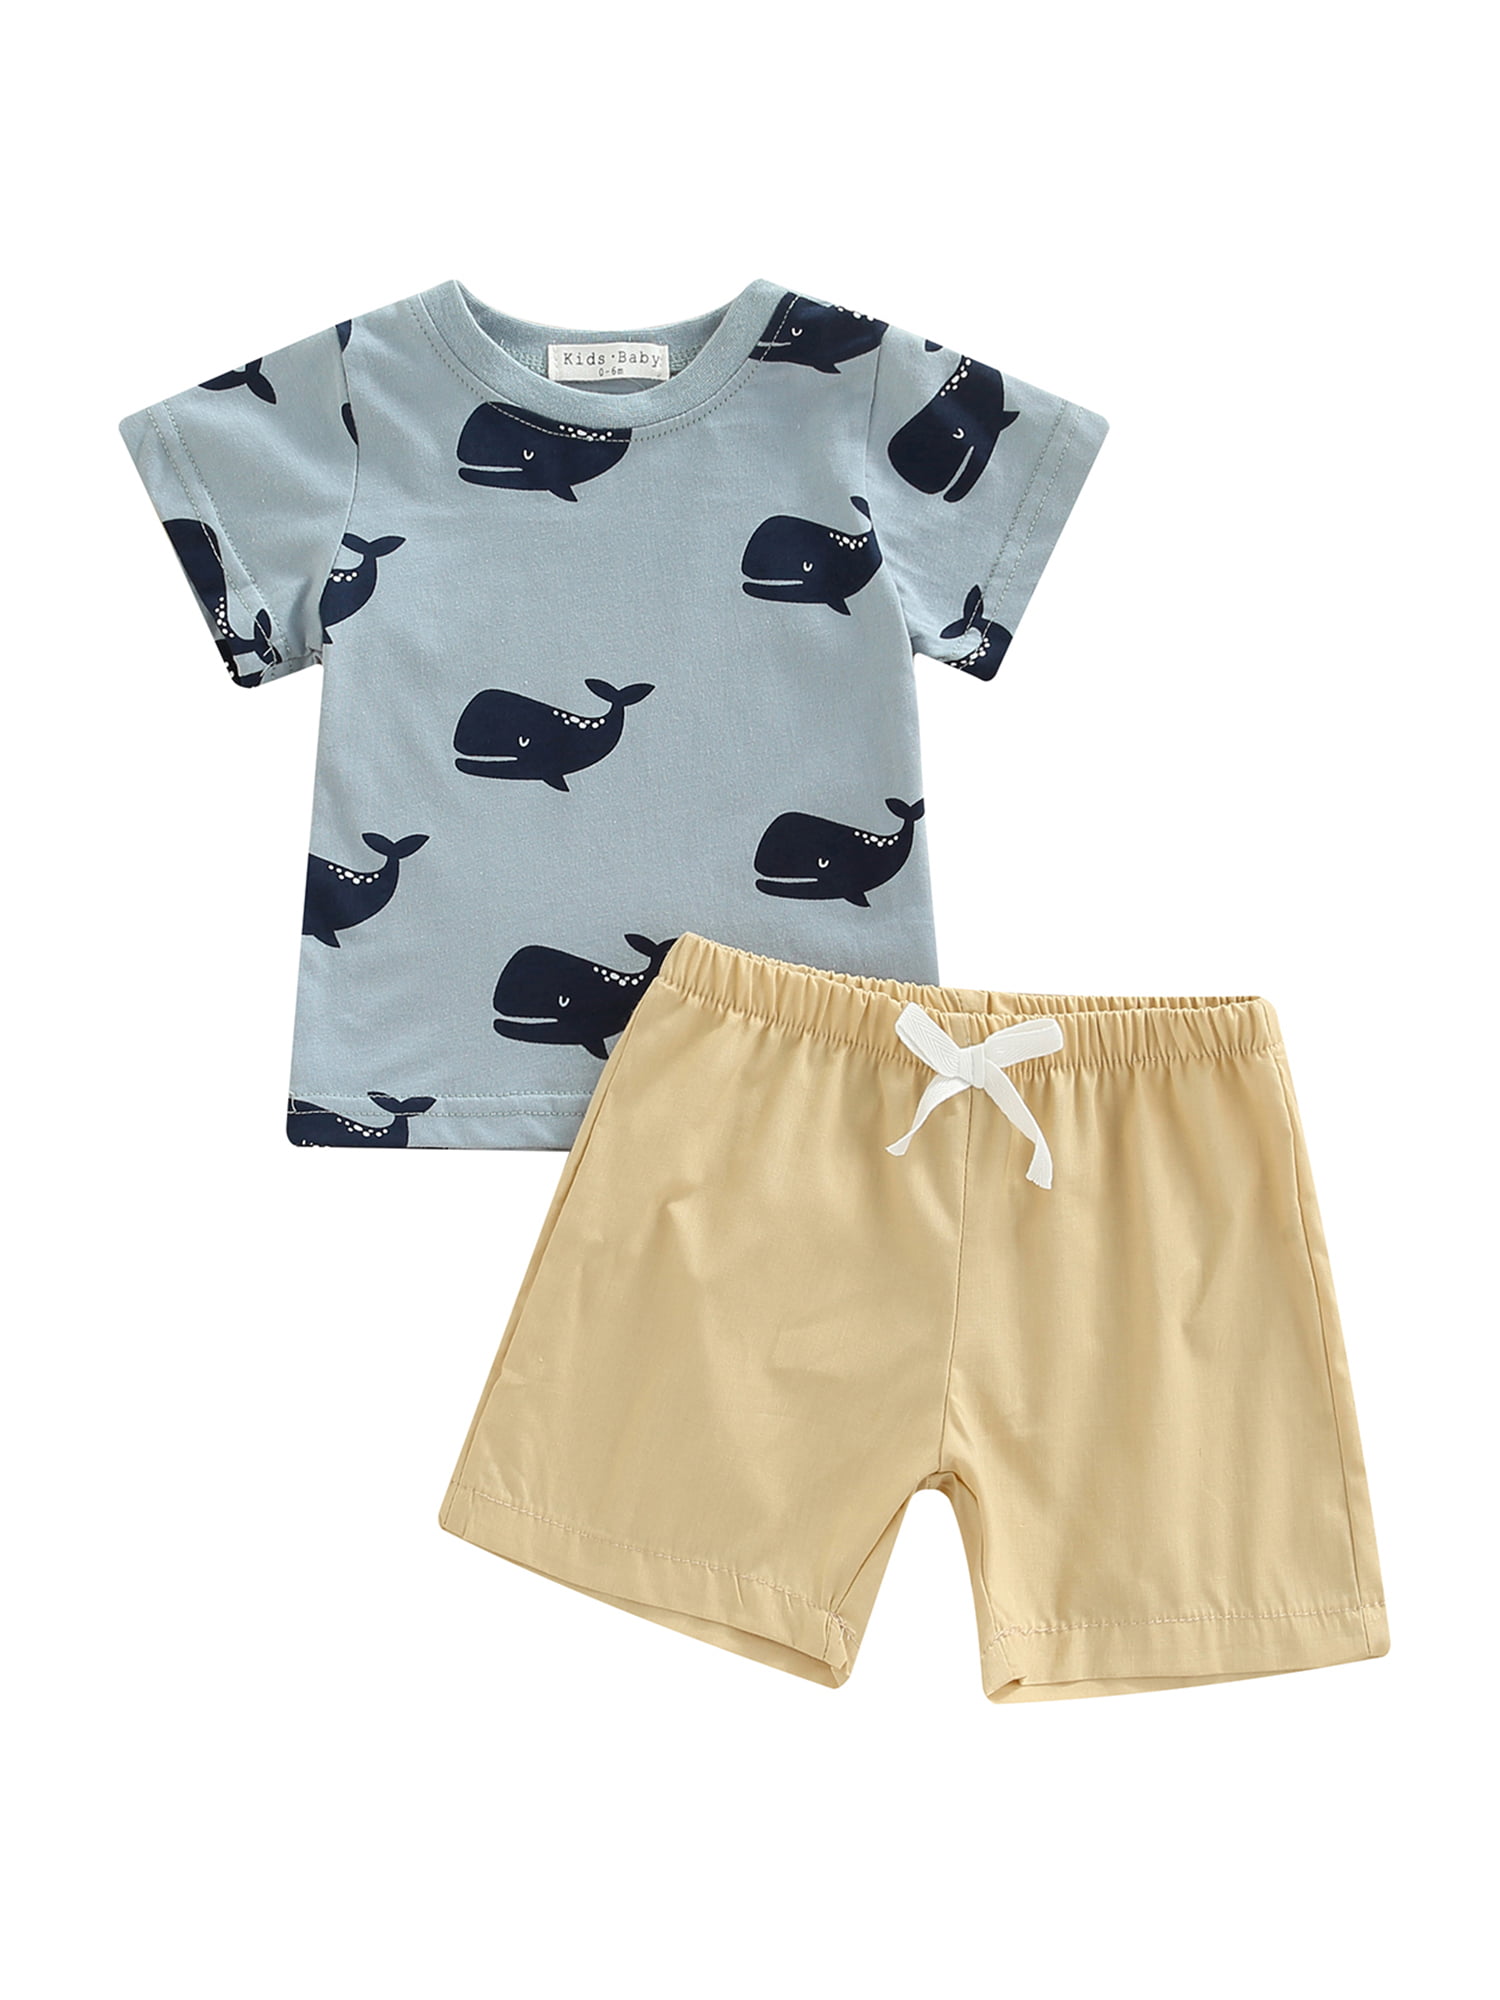 4 Preemie and Newborn Infant Sizes Whale of a Time Baby Shirt Shorts Outfit 